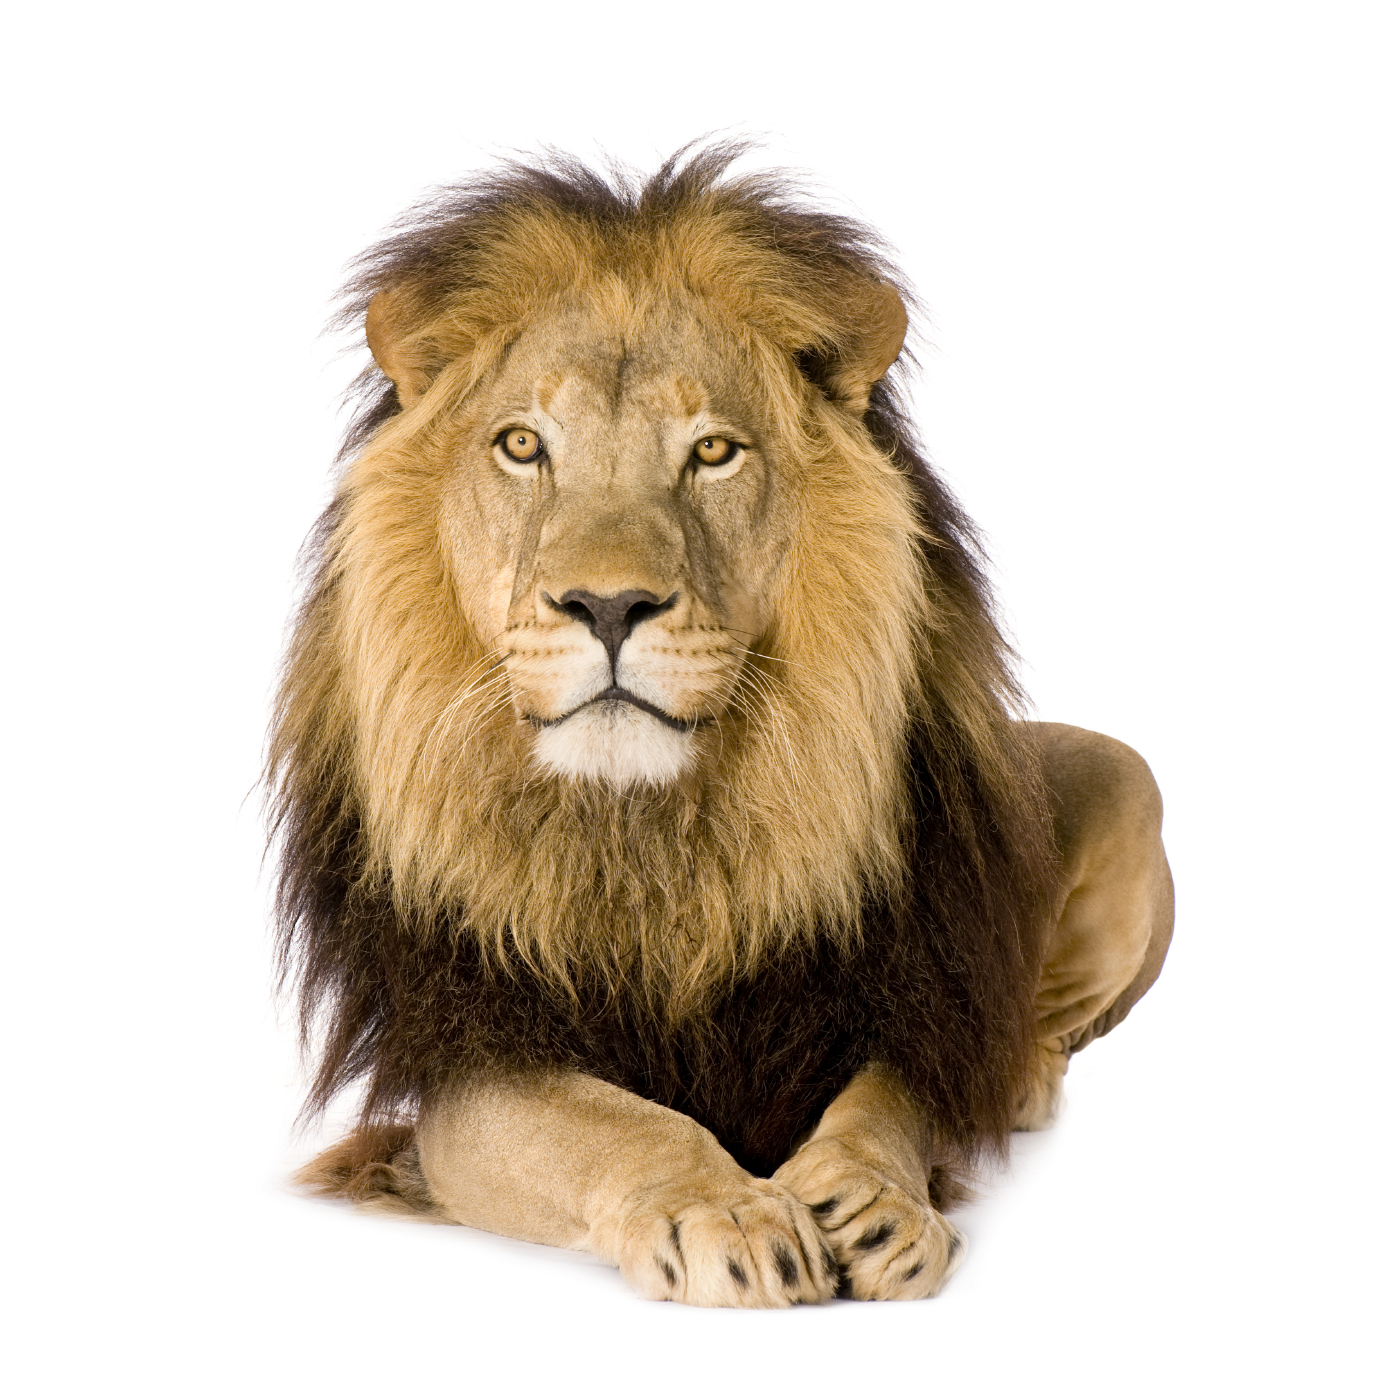 lion facts and pictures for kids download